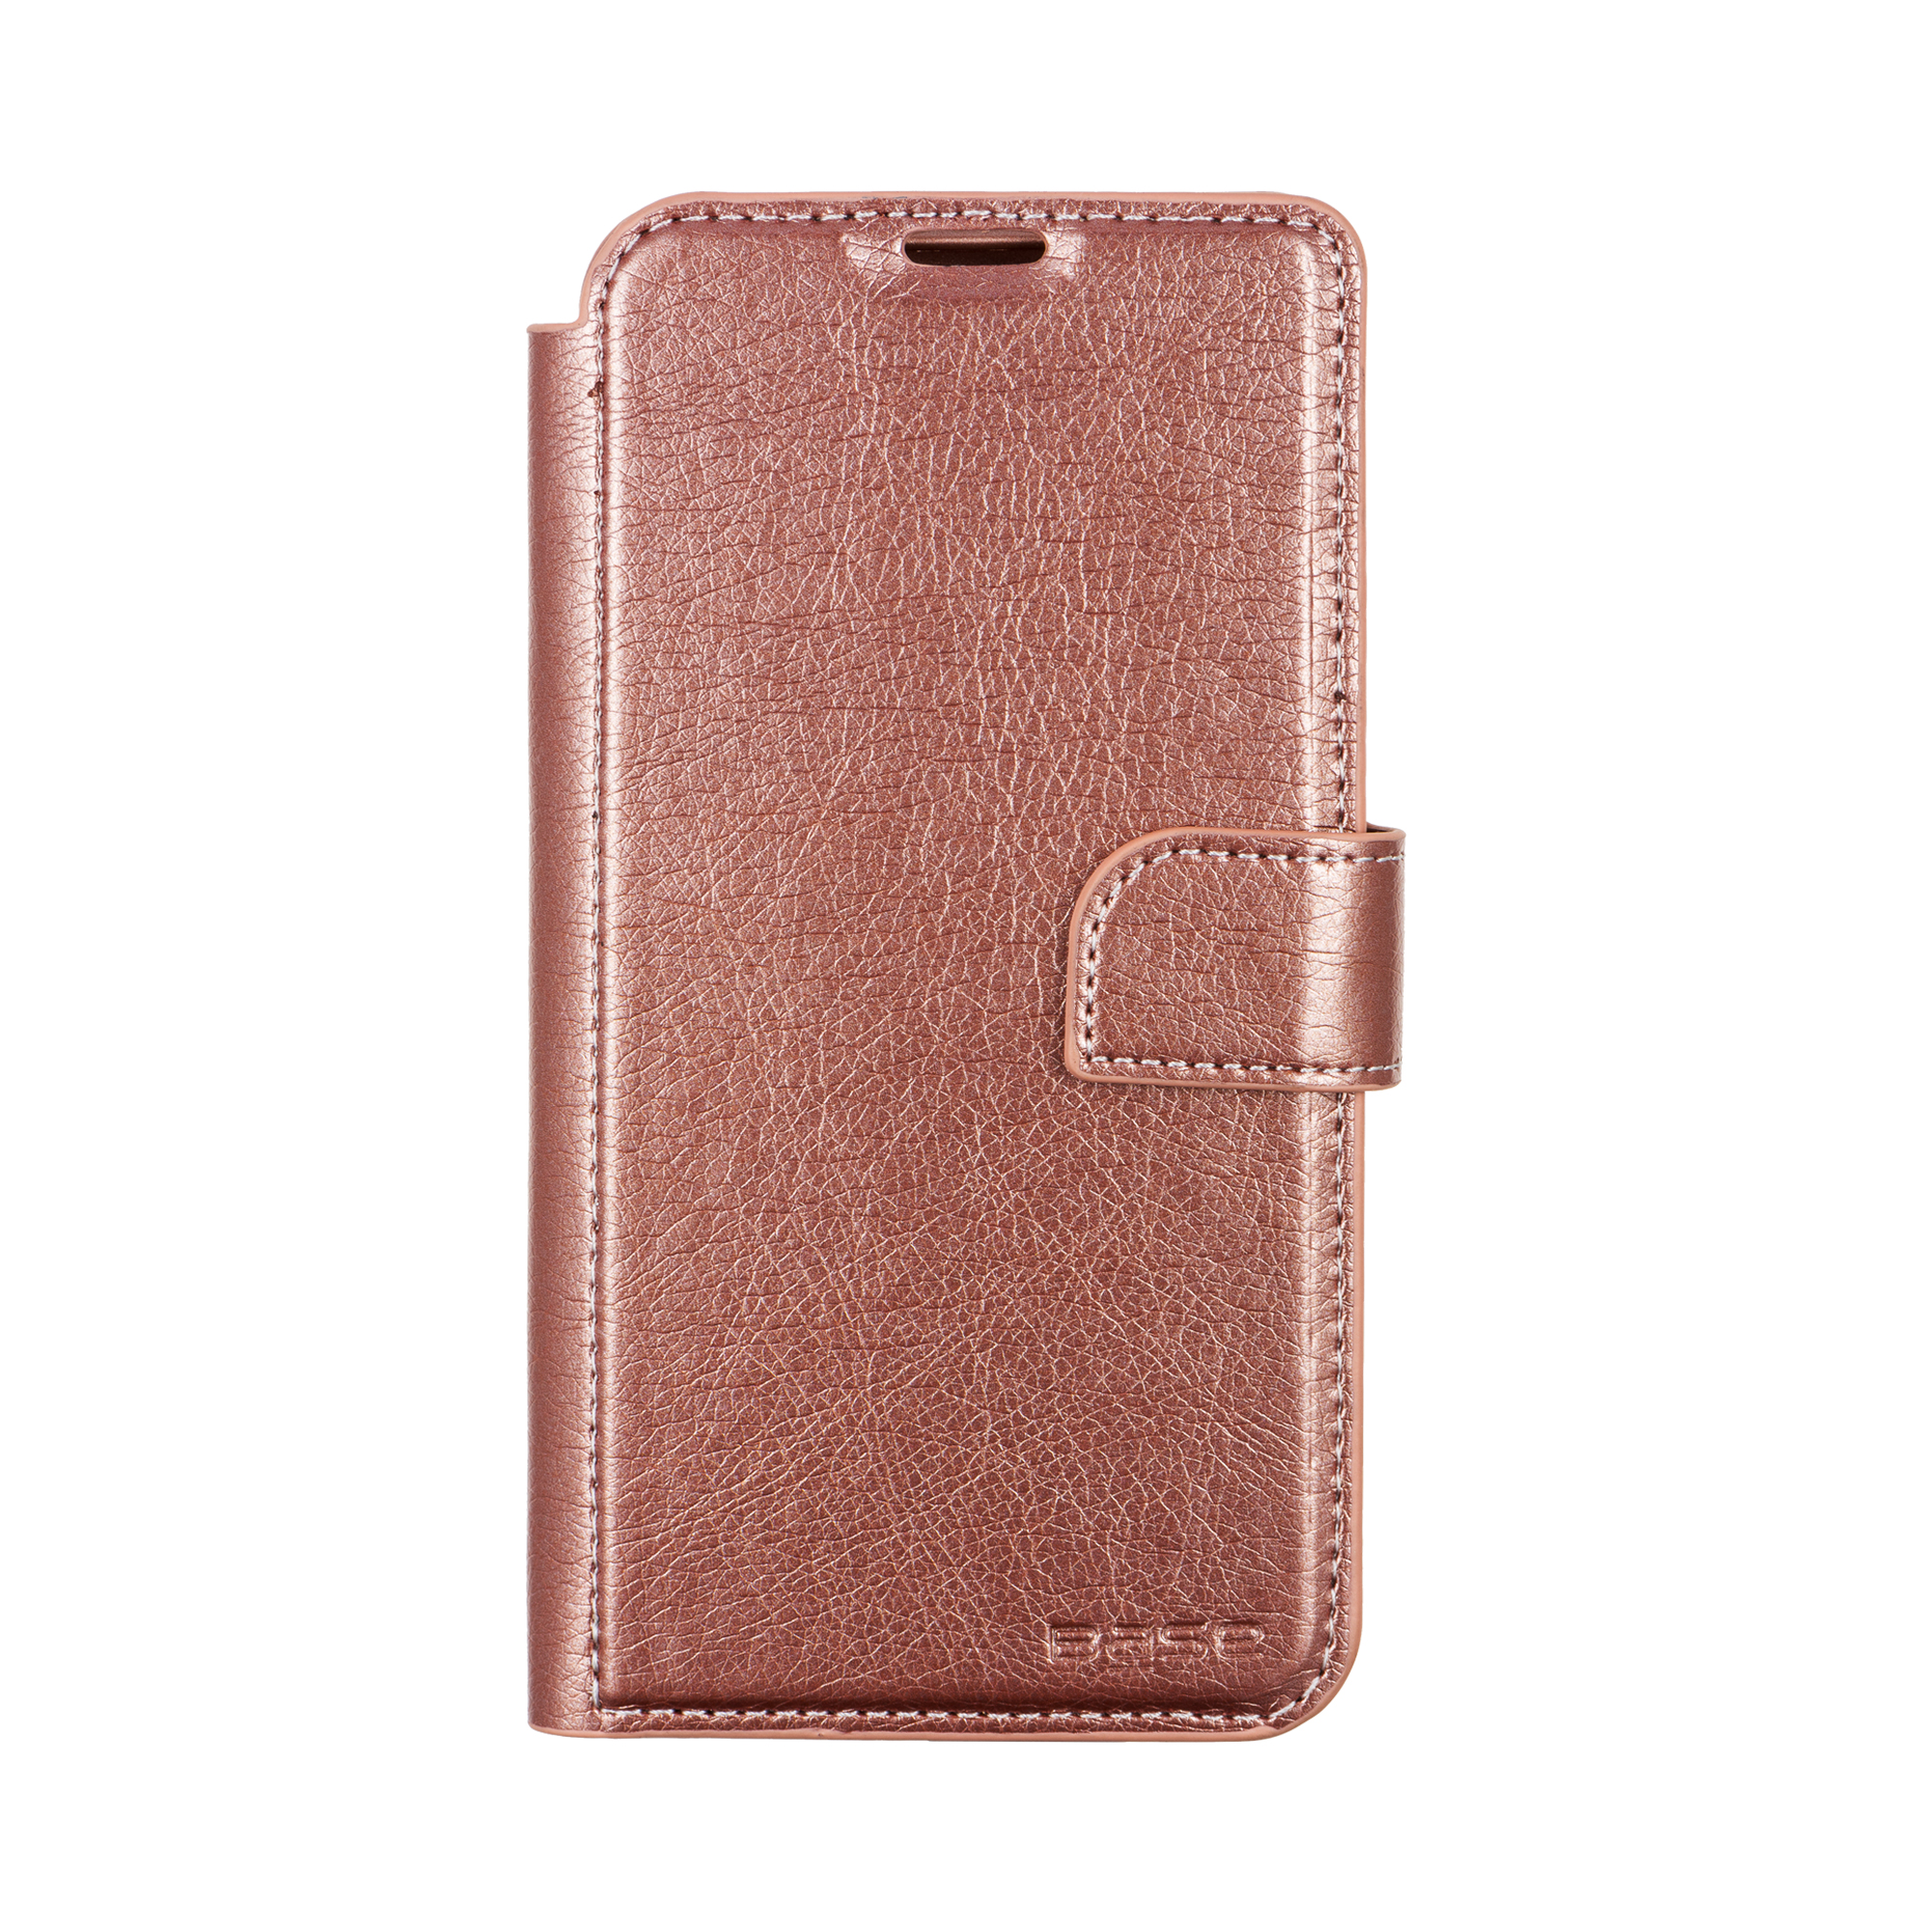 Pink wallet case for iPhone 11 cell phones